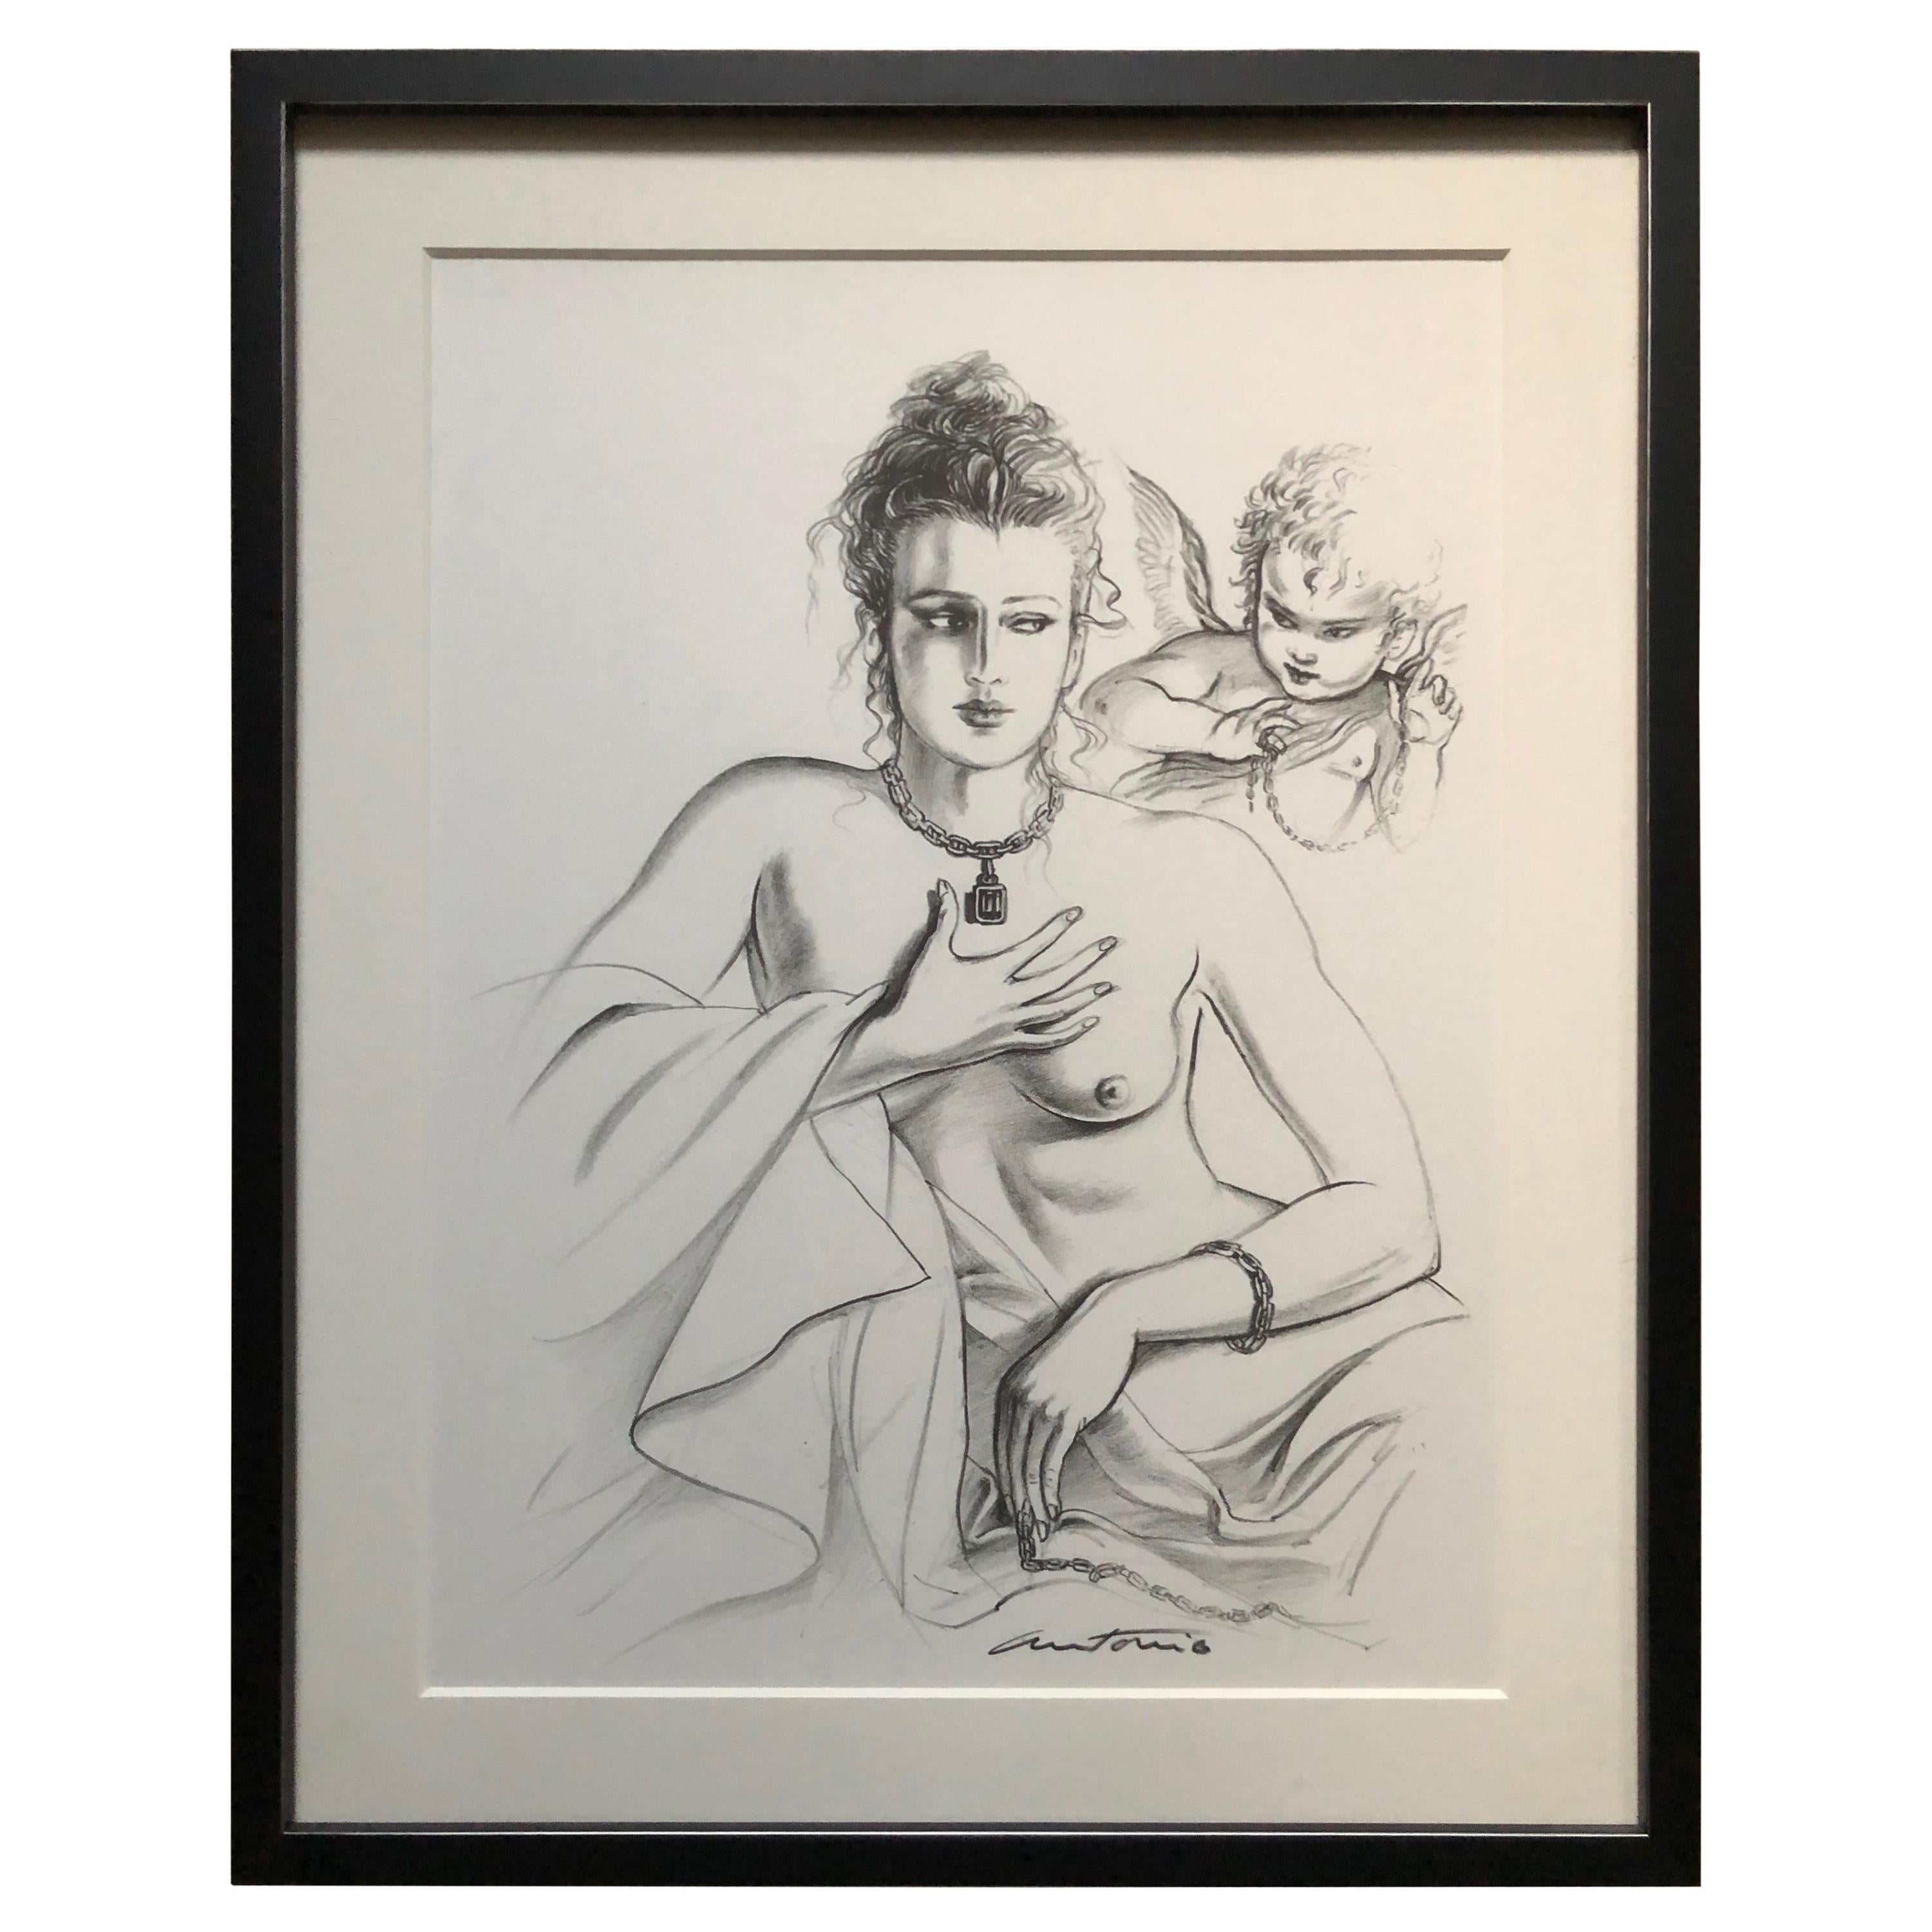 Antonio Lopez 1979 Coty Award Lithograph Barry Kieselstein-Cord For Sale